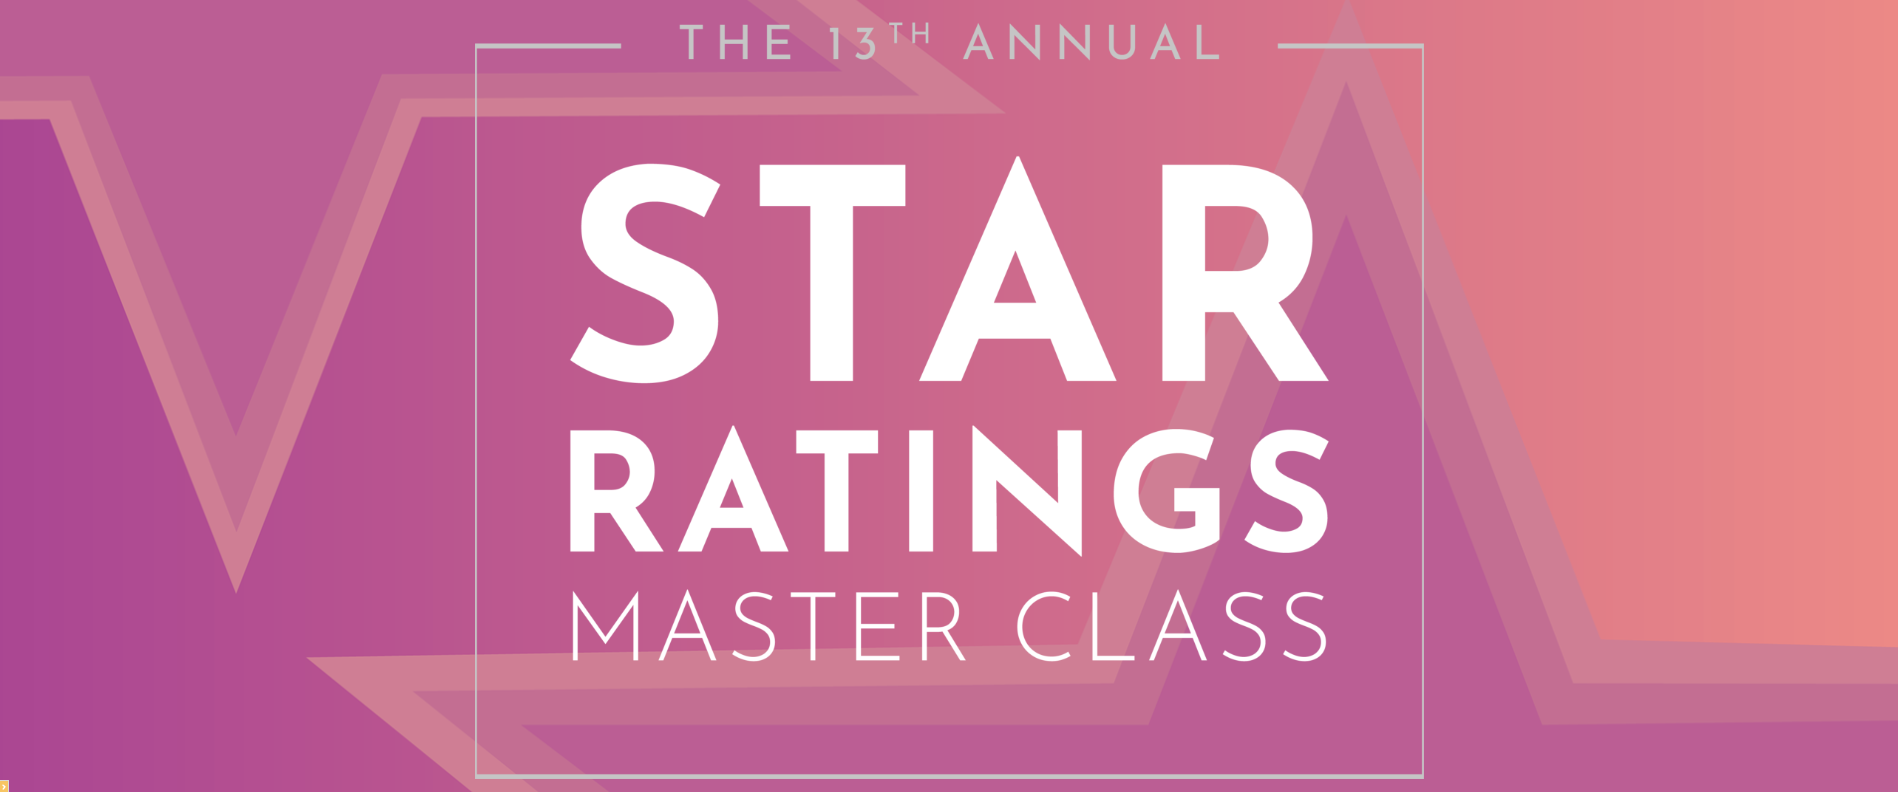 The 13th Annual Star Ratings Master Class